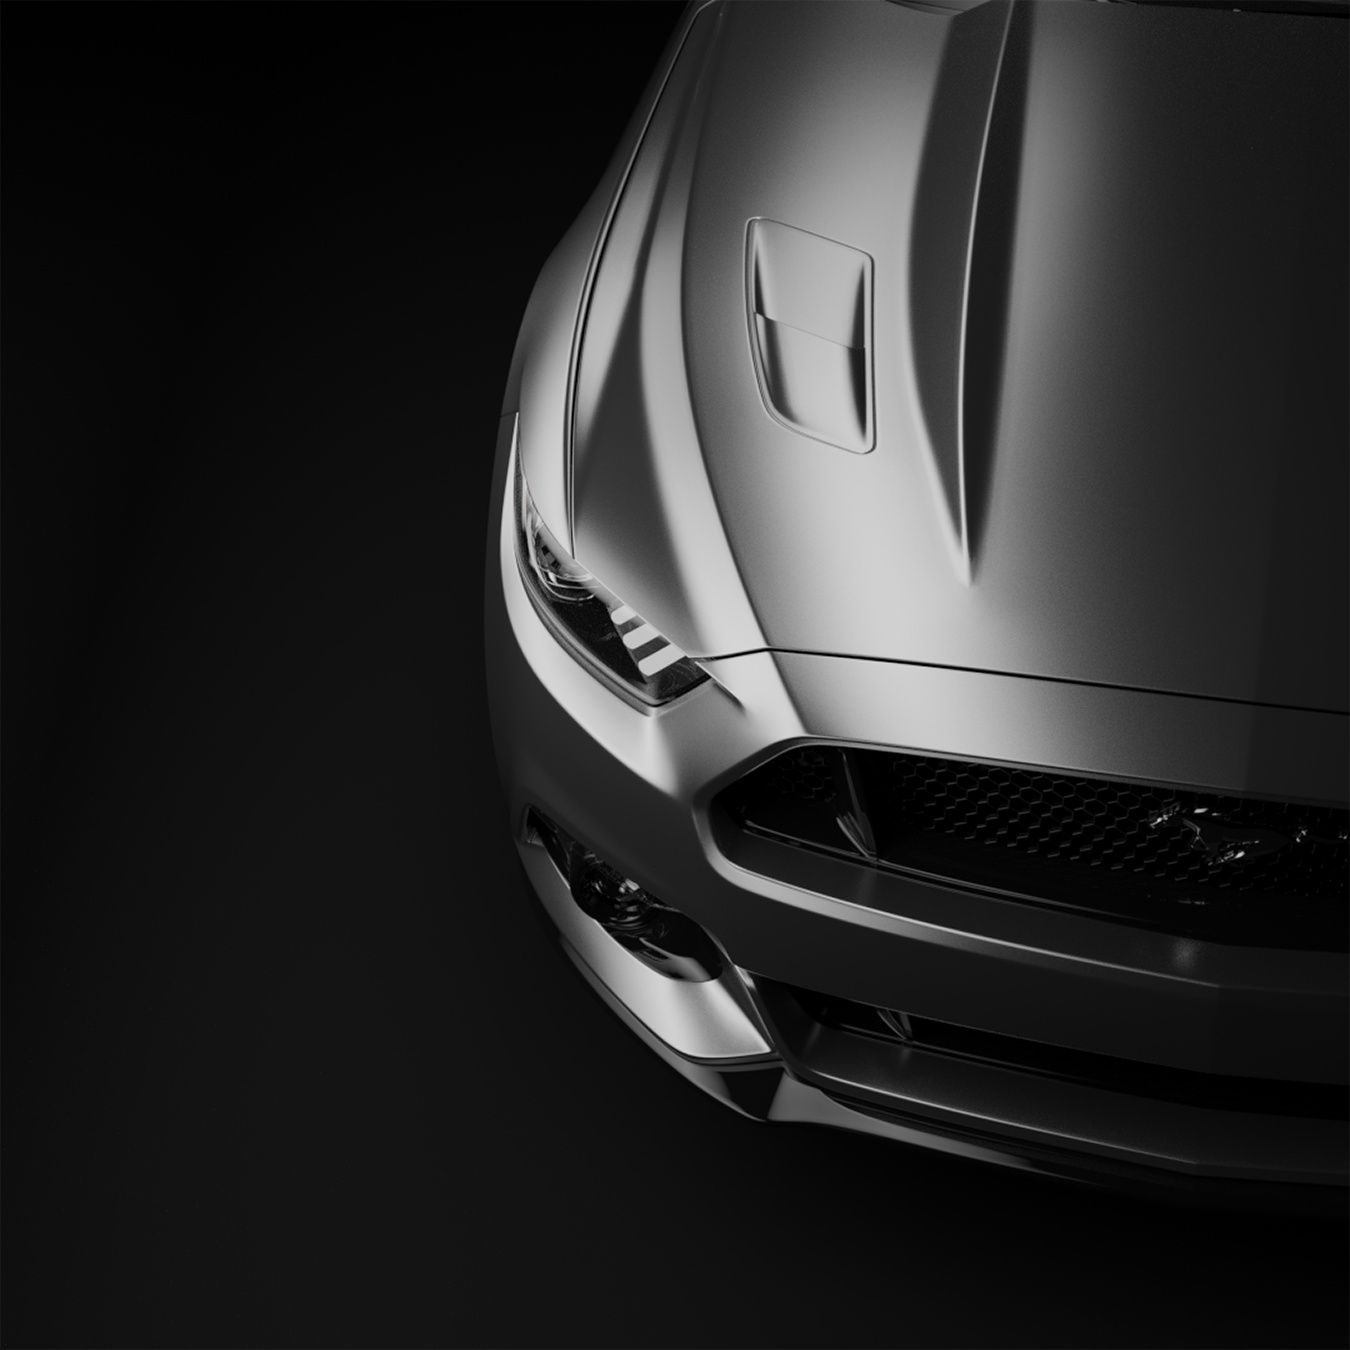 Ford Mustang GT (new look) - Finished Projects - Blender Artists Community